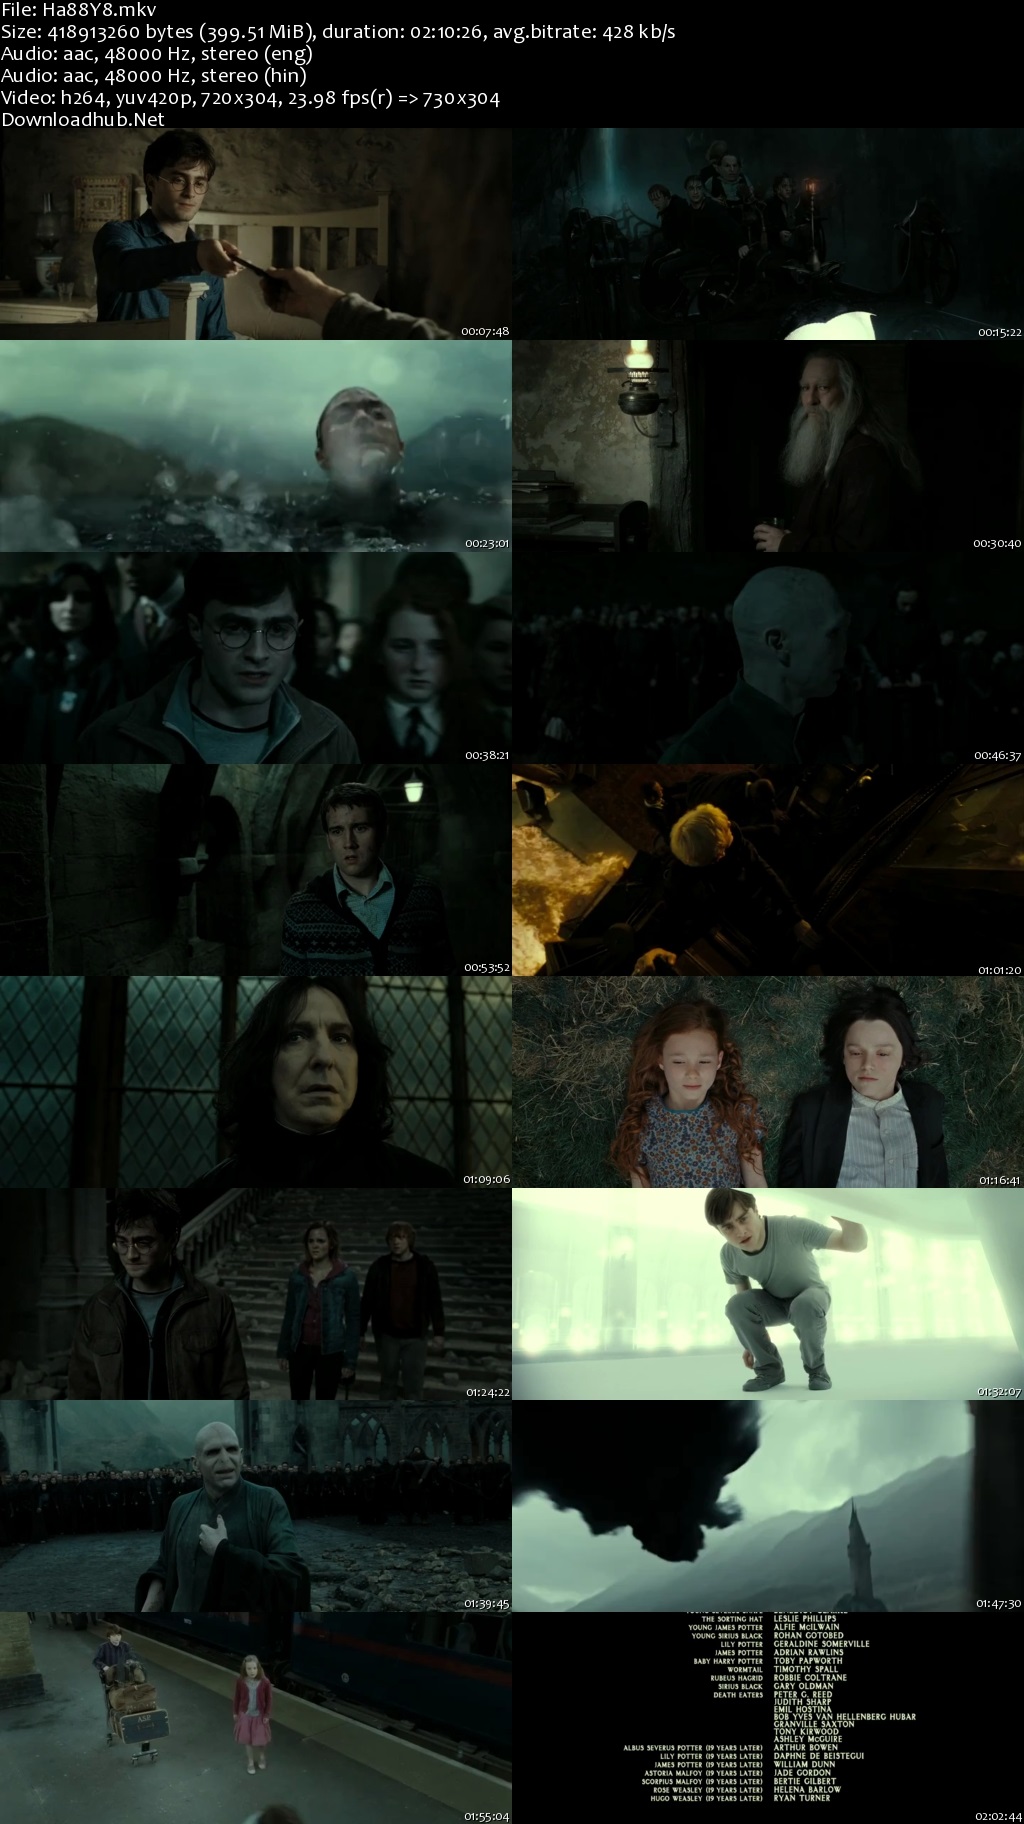 harry potter and the deathly hallows part 2 in hindi free download 300mb